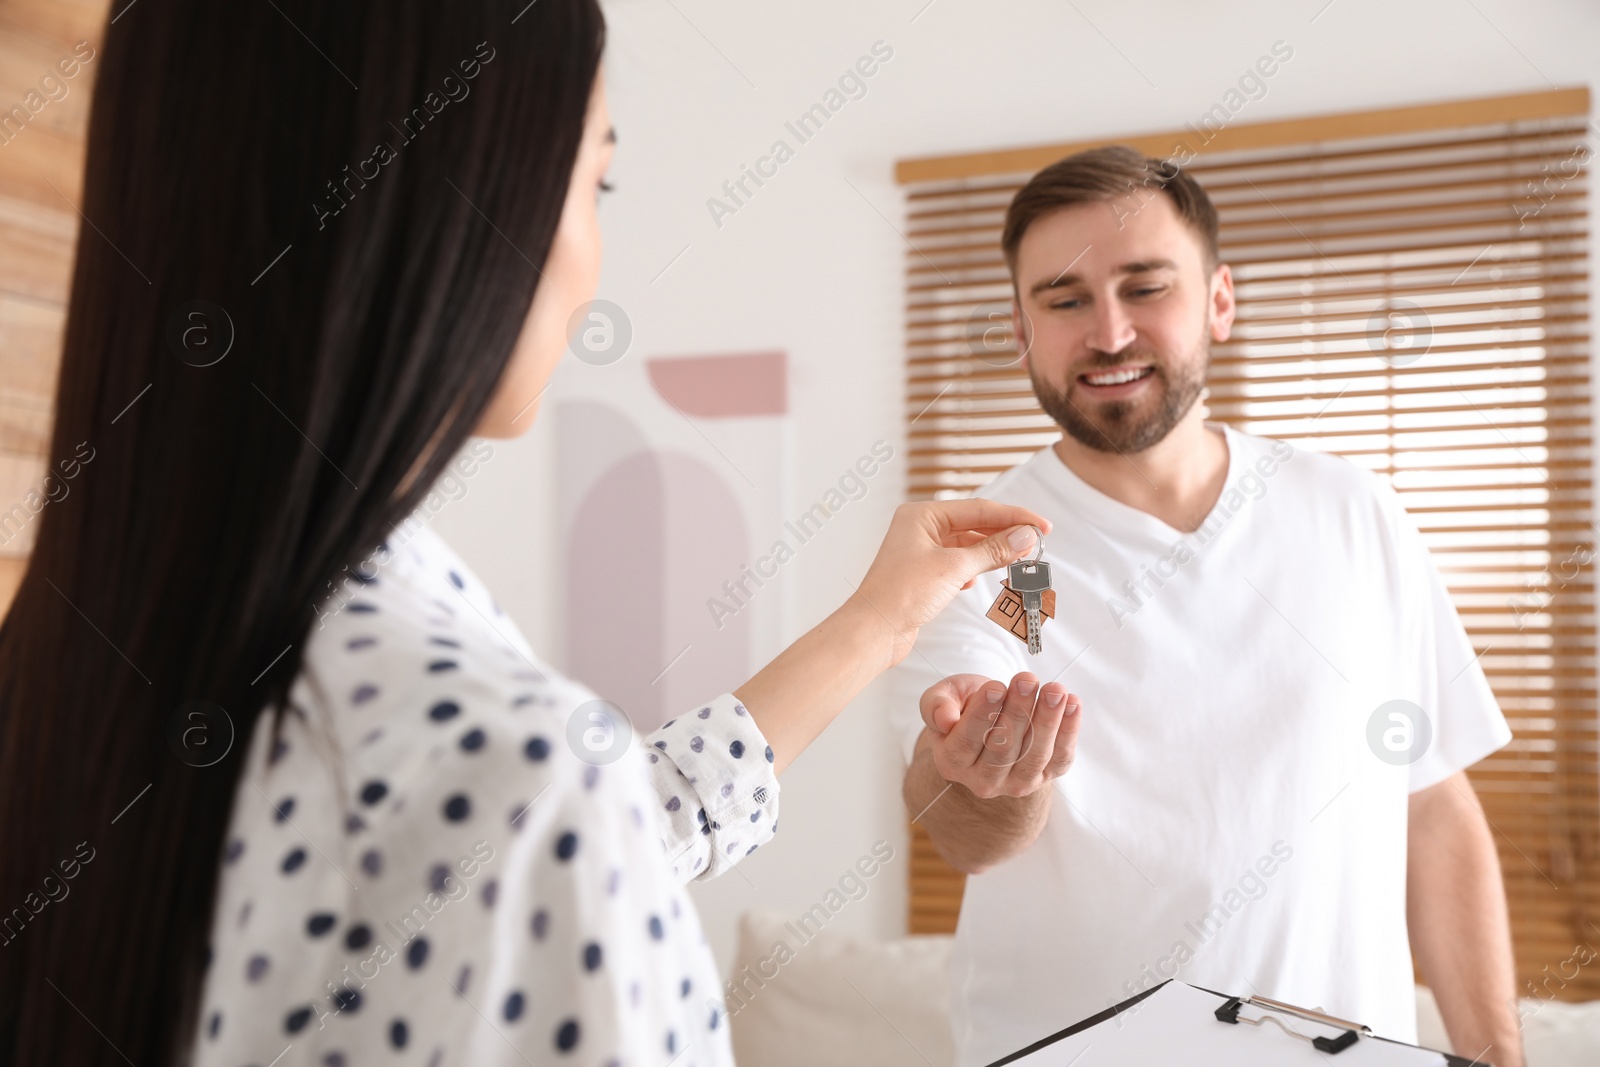 Photo of Real estate agent giving key to happy young man in new house, focus on hands